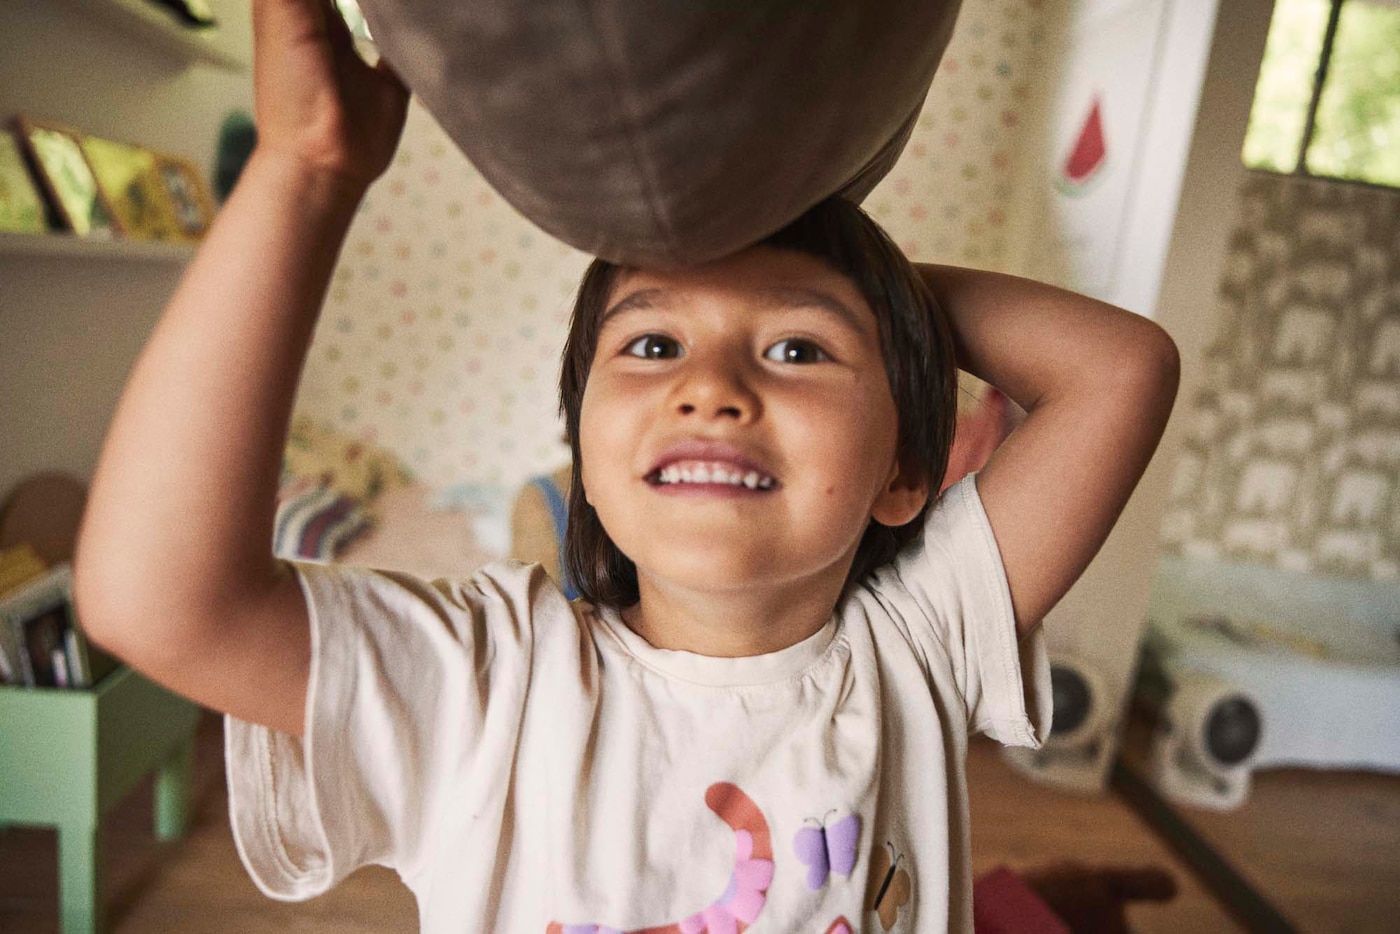 A smiling child in a white t-shirt balancing a toy on their head.